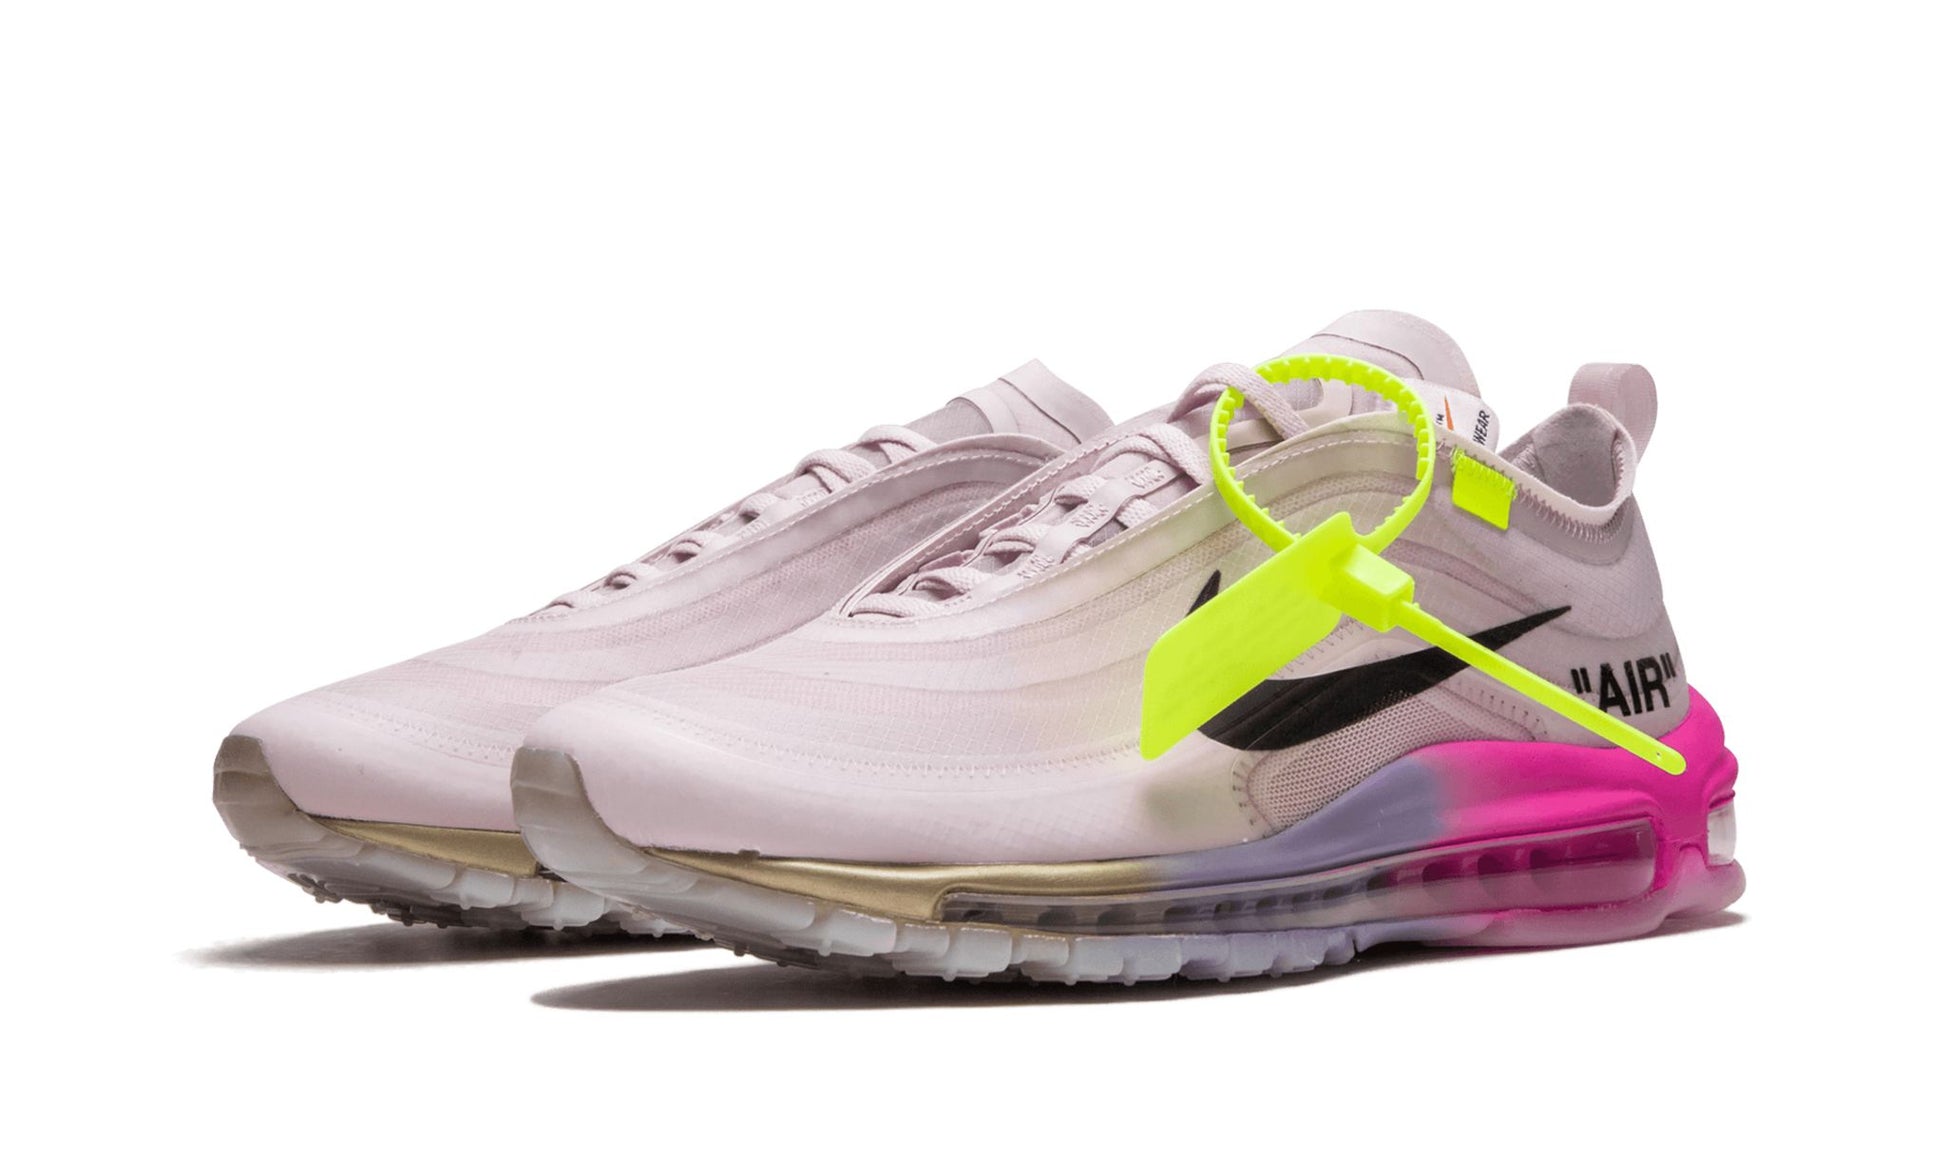 Off-White Nike Air Max 97 Serena Williams Queen Front